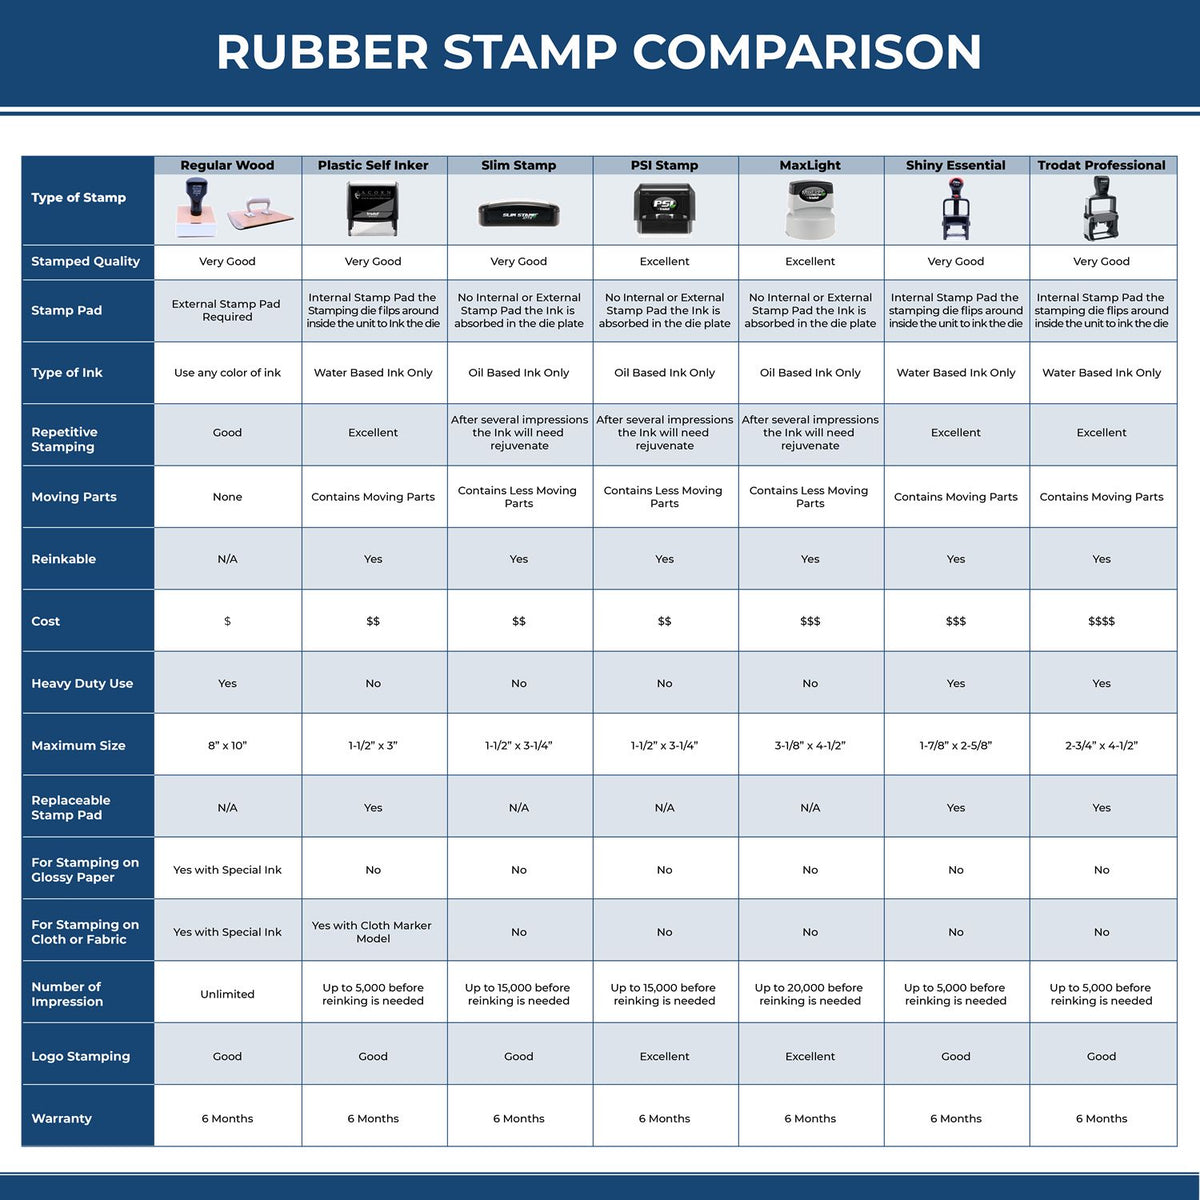 Large Self-Inking Small Packet Stamp 5564S Rubber Stamp Comparison